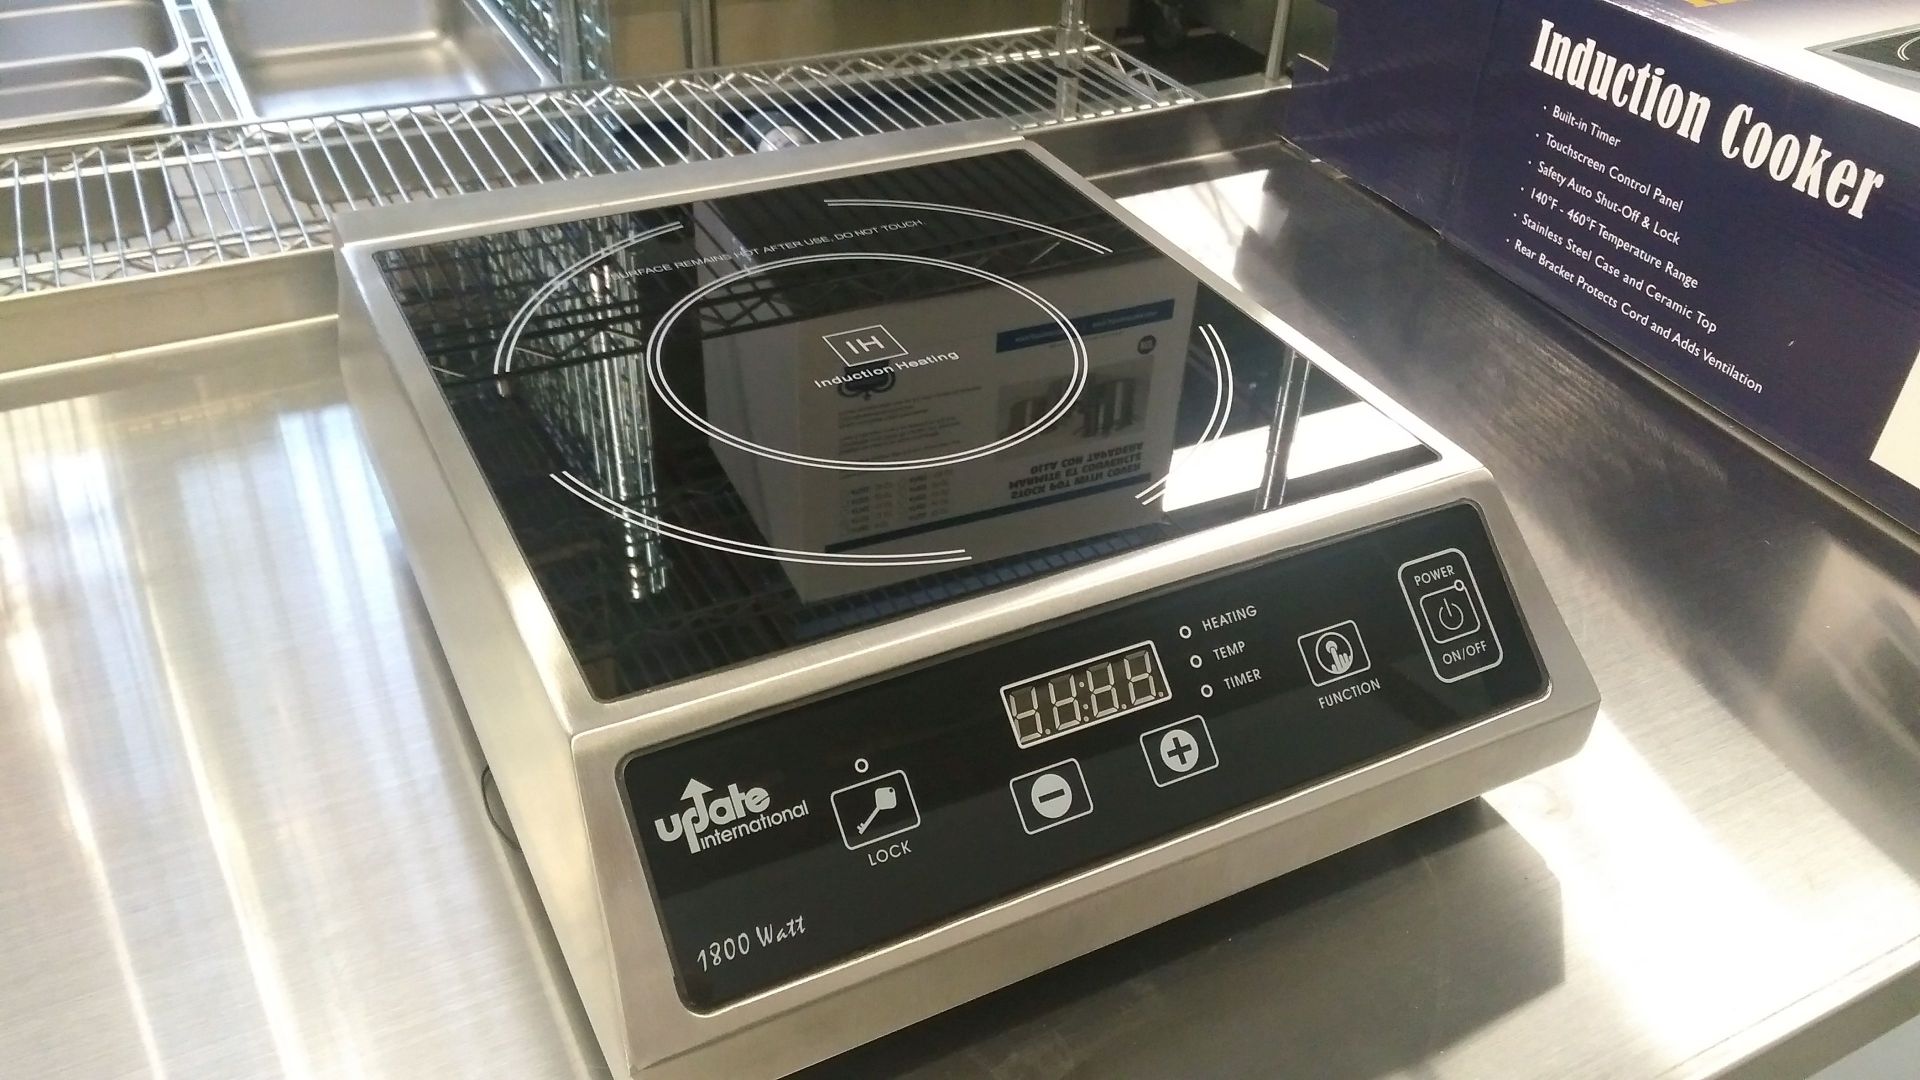 Update IC-1800WN Countertop Commercial Induction Cooktop - Image 2 of 7